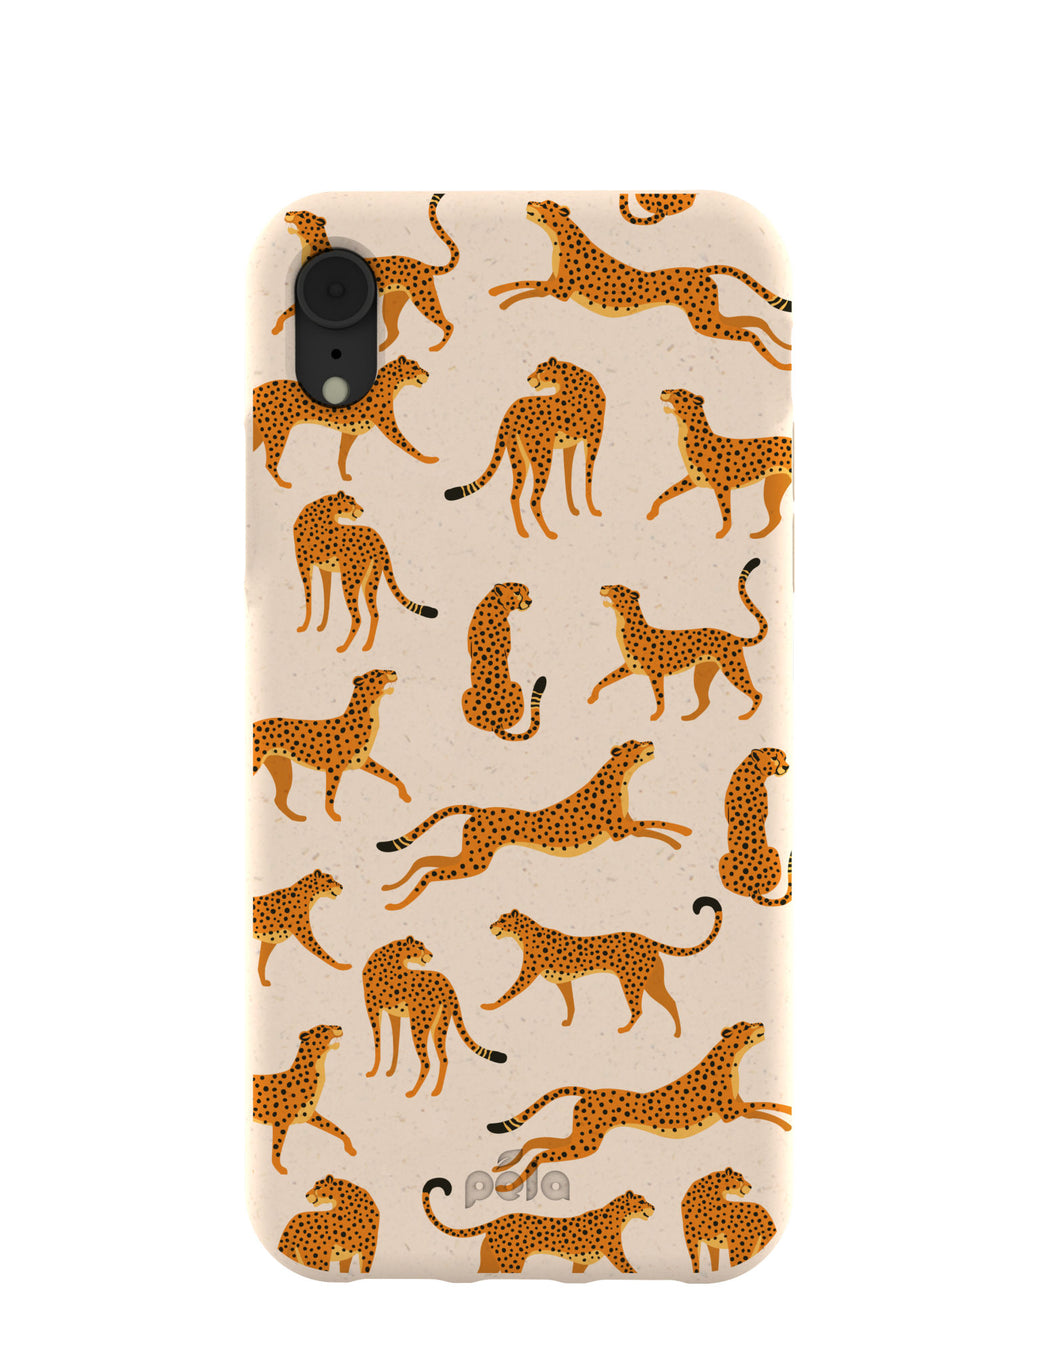 Seashell Wild Cats iPhone XR Case